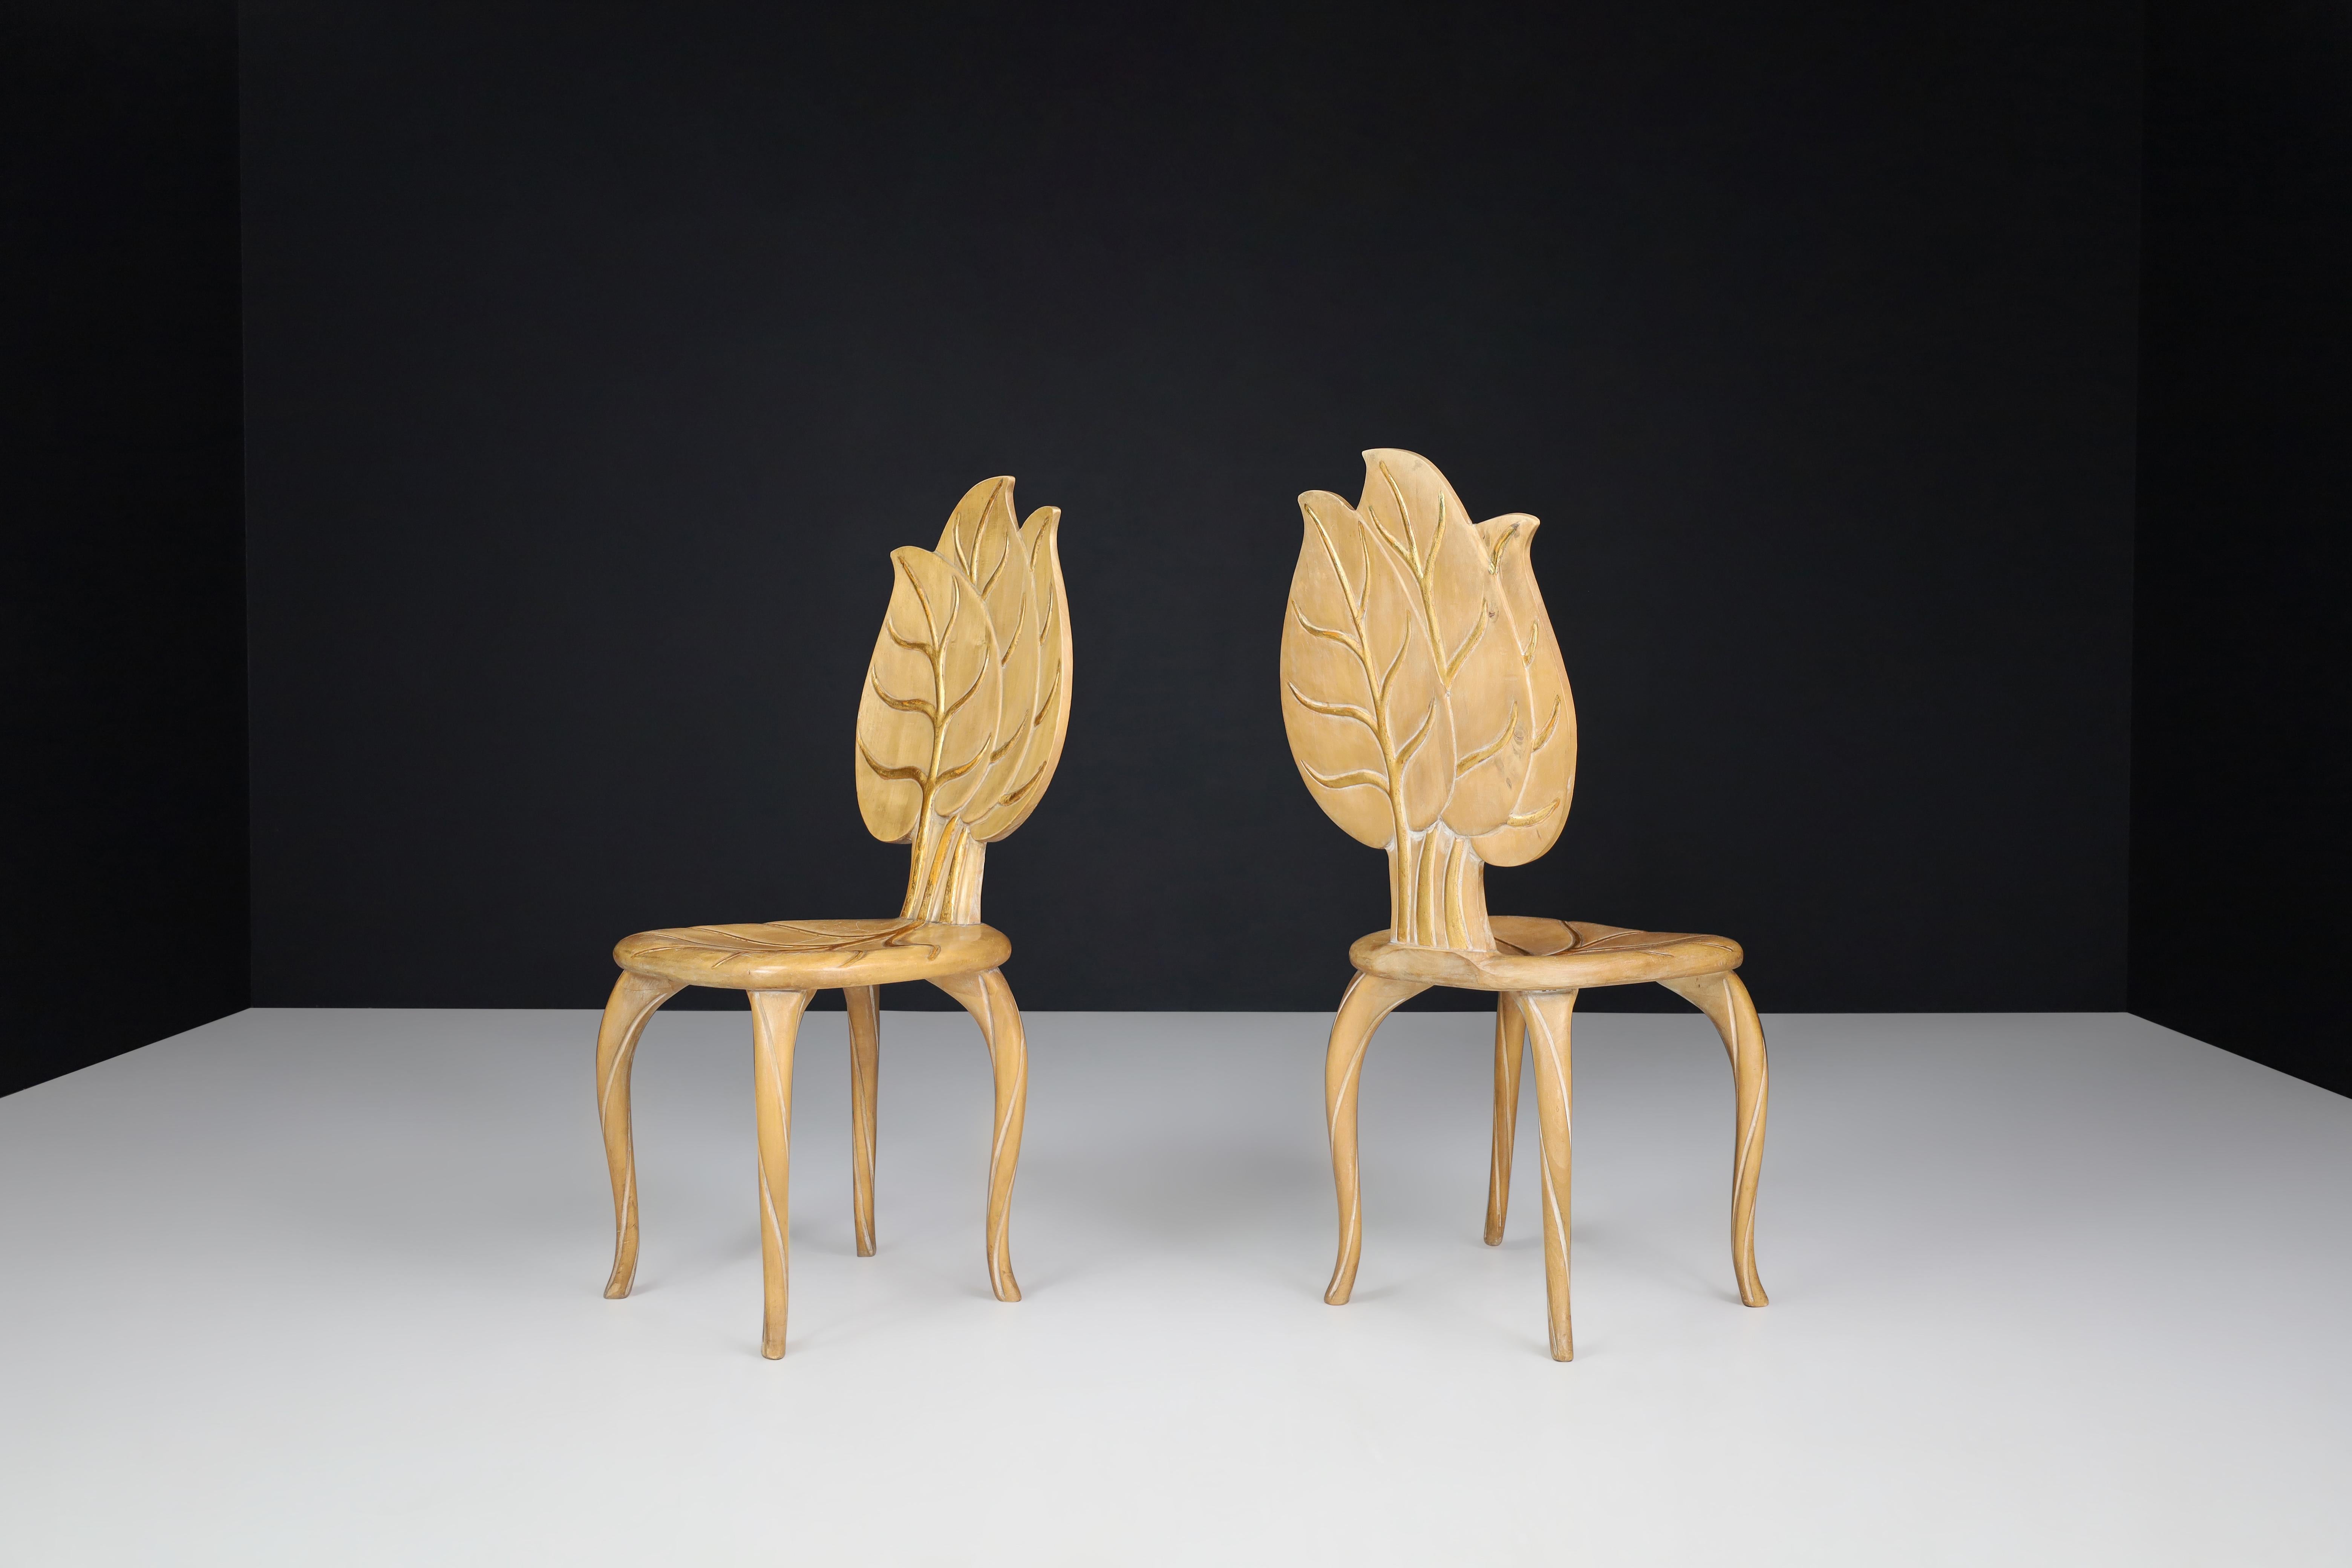 Bartolozzi & Maioli wooden and gold leaf chairs, Italy, 1970s.

Pair of two Bartolozzi & Maioli hand carved wooden leaf chairs with original patina. These chairs would make an eye-catching addition to any interior, such as a living room, family